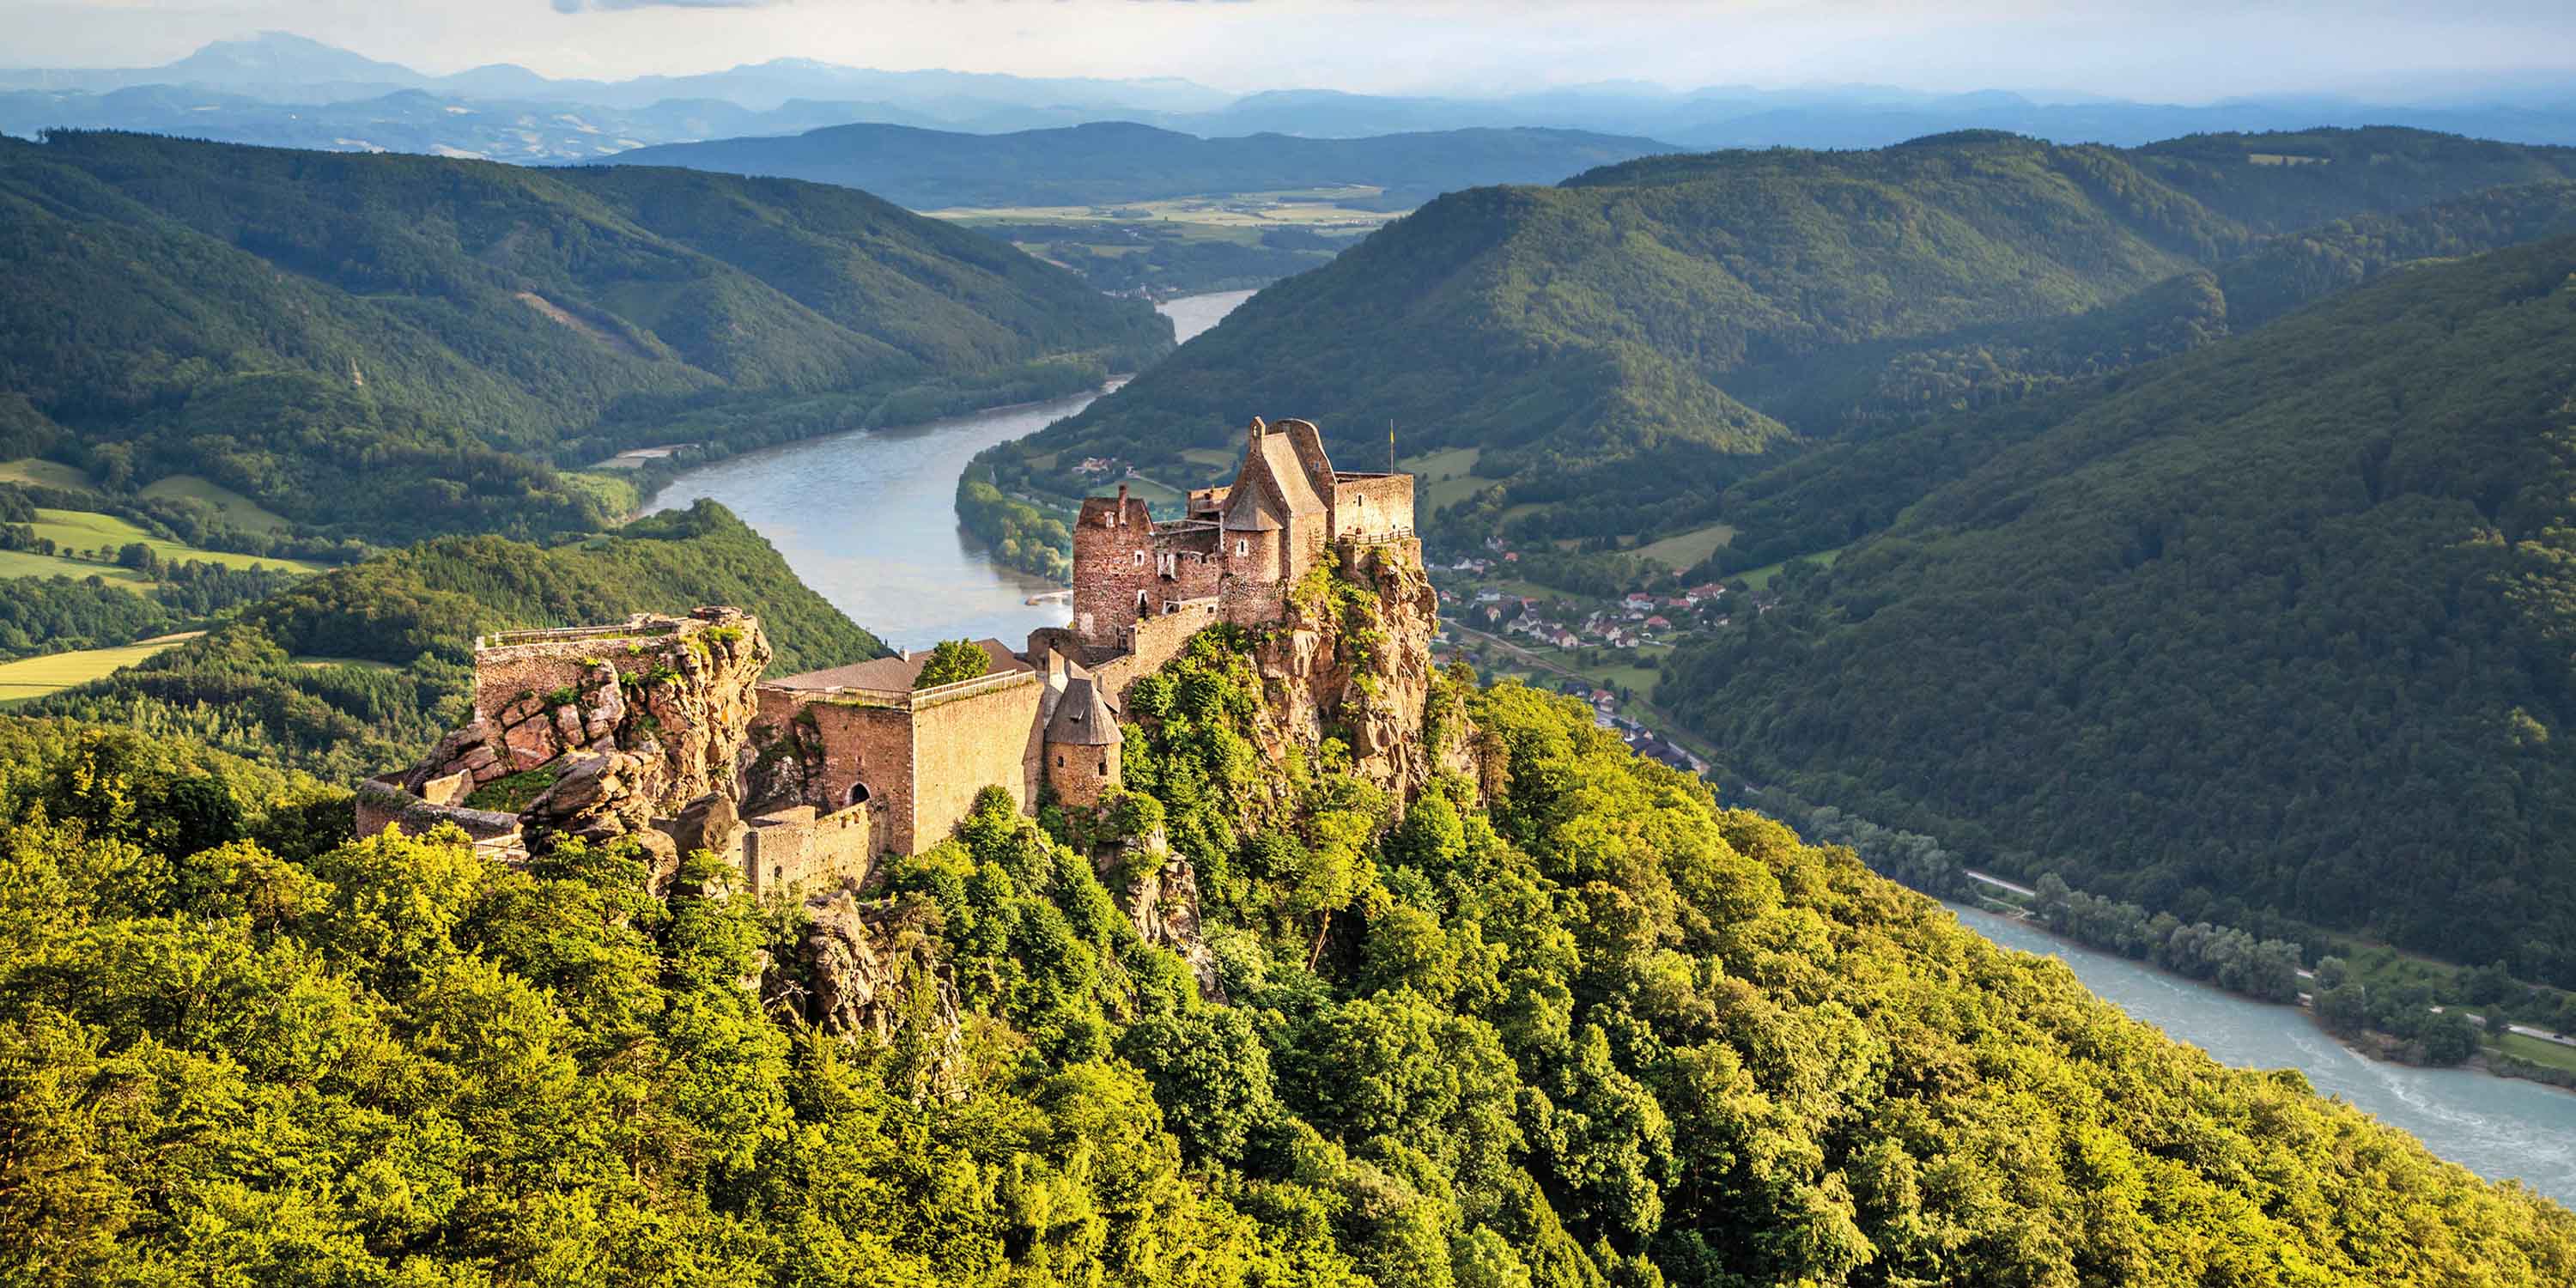 a castle engulfed in the lush landscape on a hill overlooking the winding Rhine river